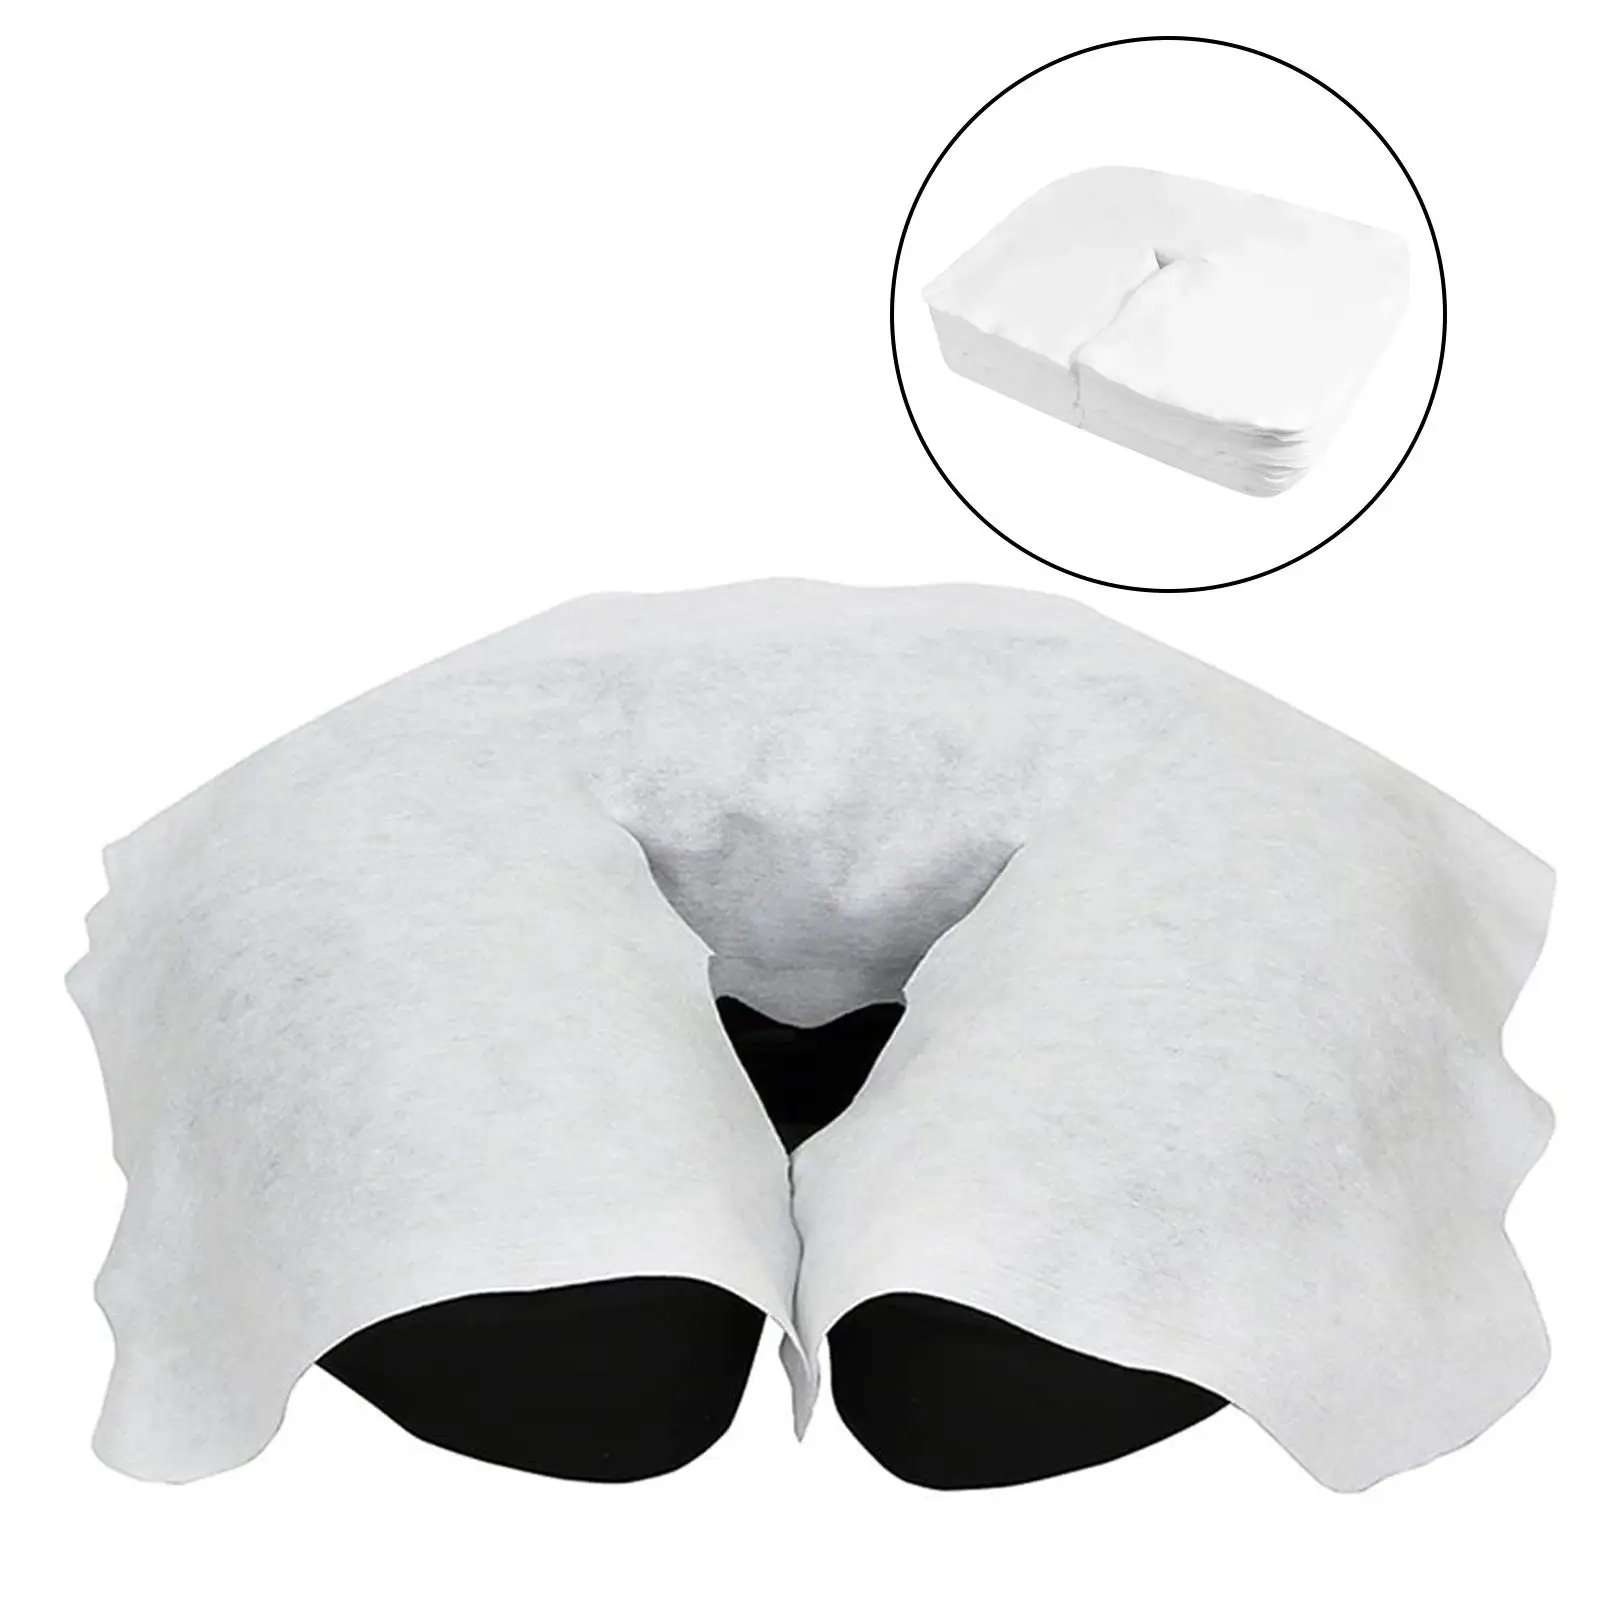 200Pcs Disposable Face Cradle Covers Face Rest Covers Non Sticking Flat Face Rest Cover for Beauty Chairs Massage Tables SPA Bed